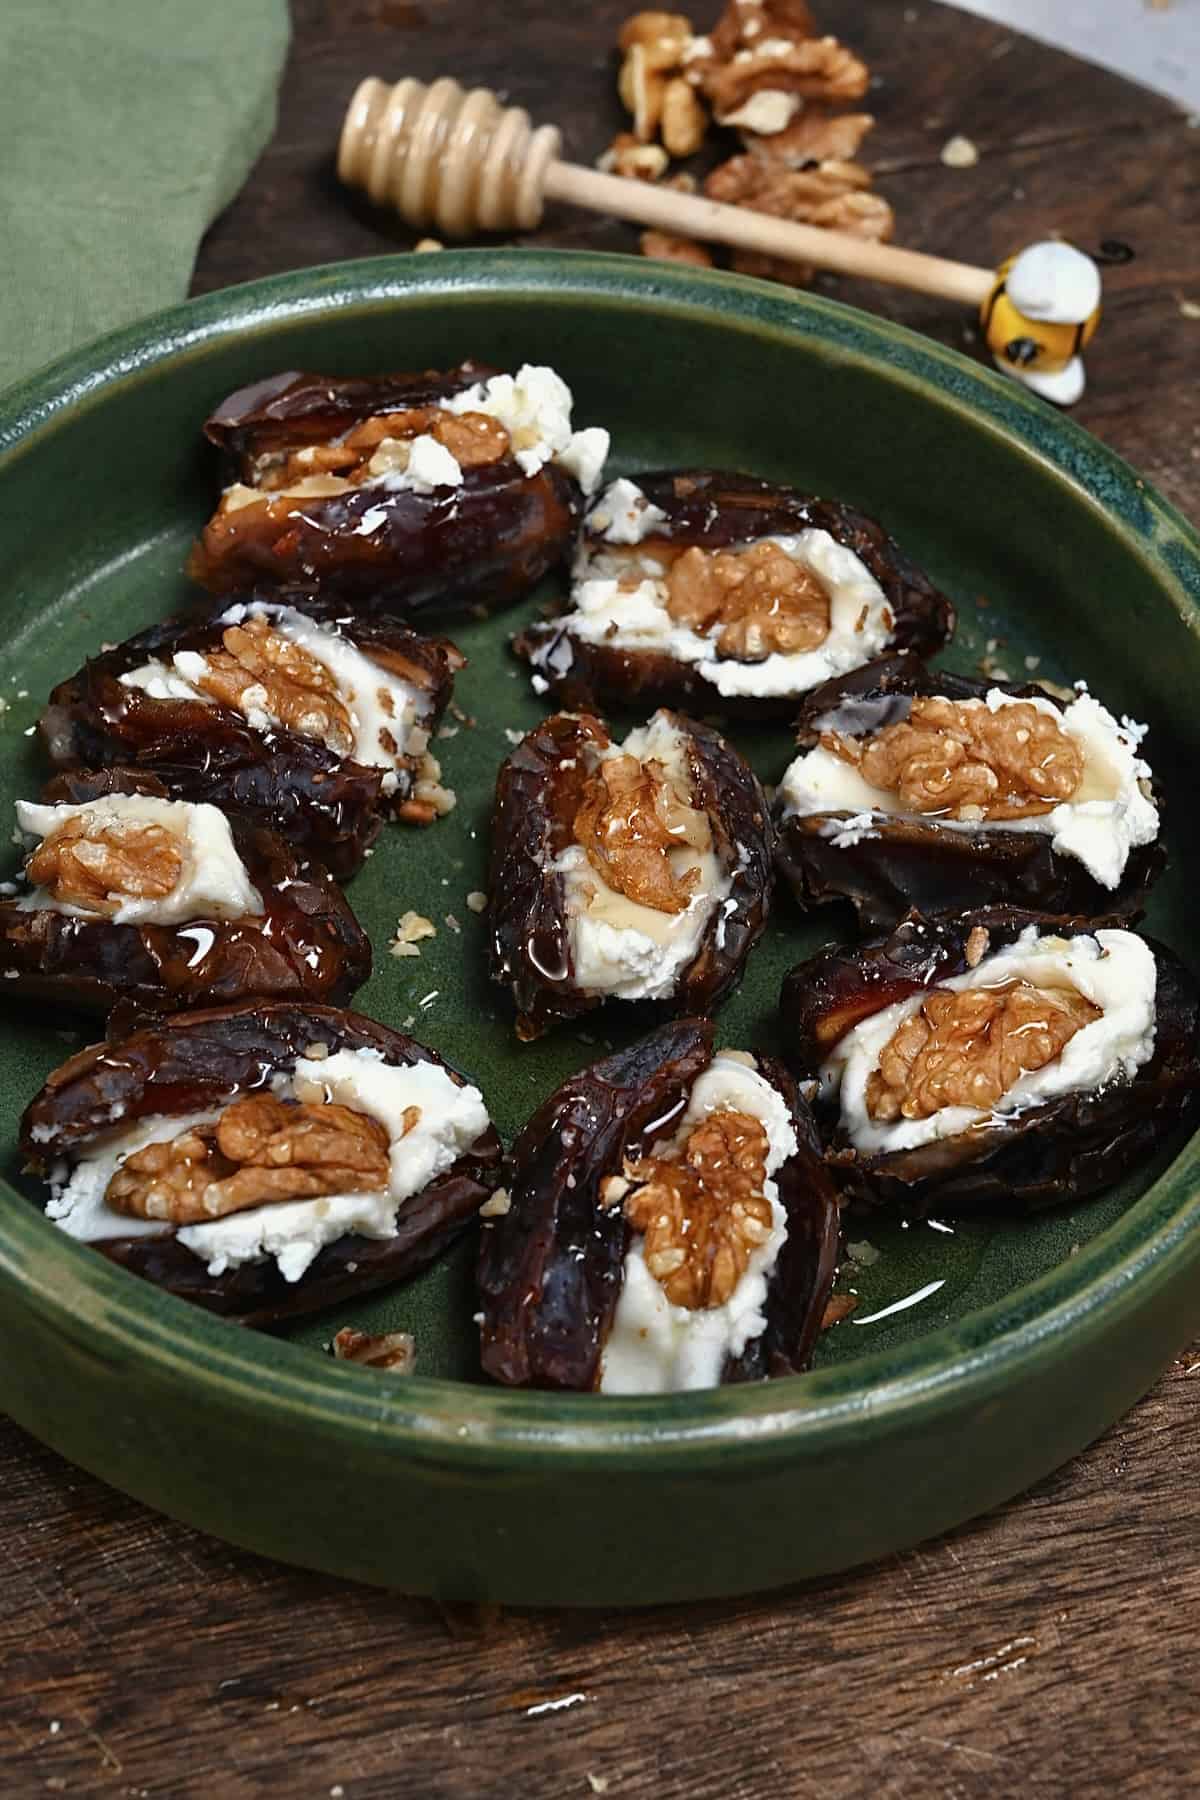 Dates stuffed with goat cheese and walnuts